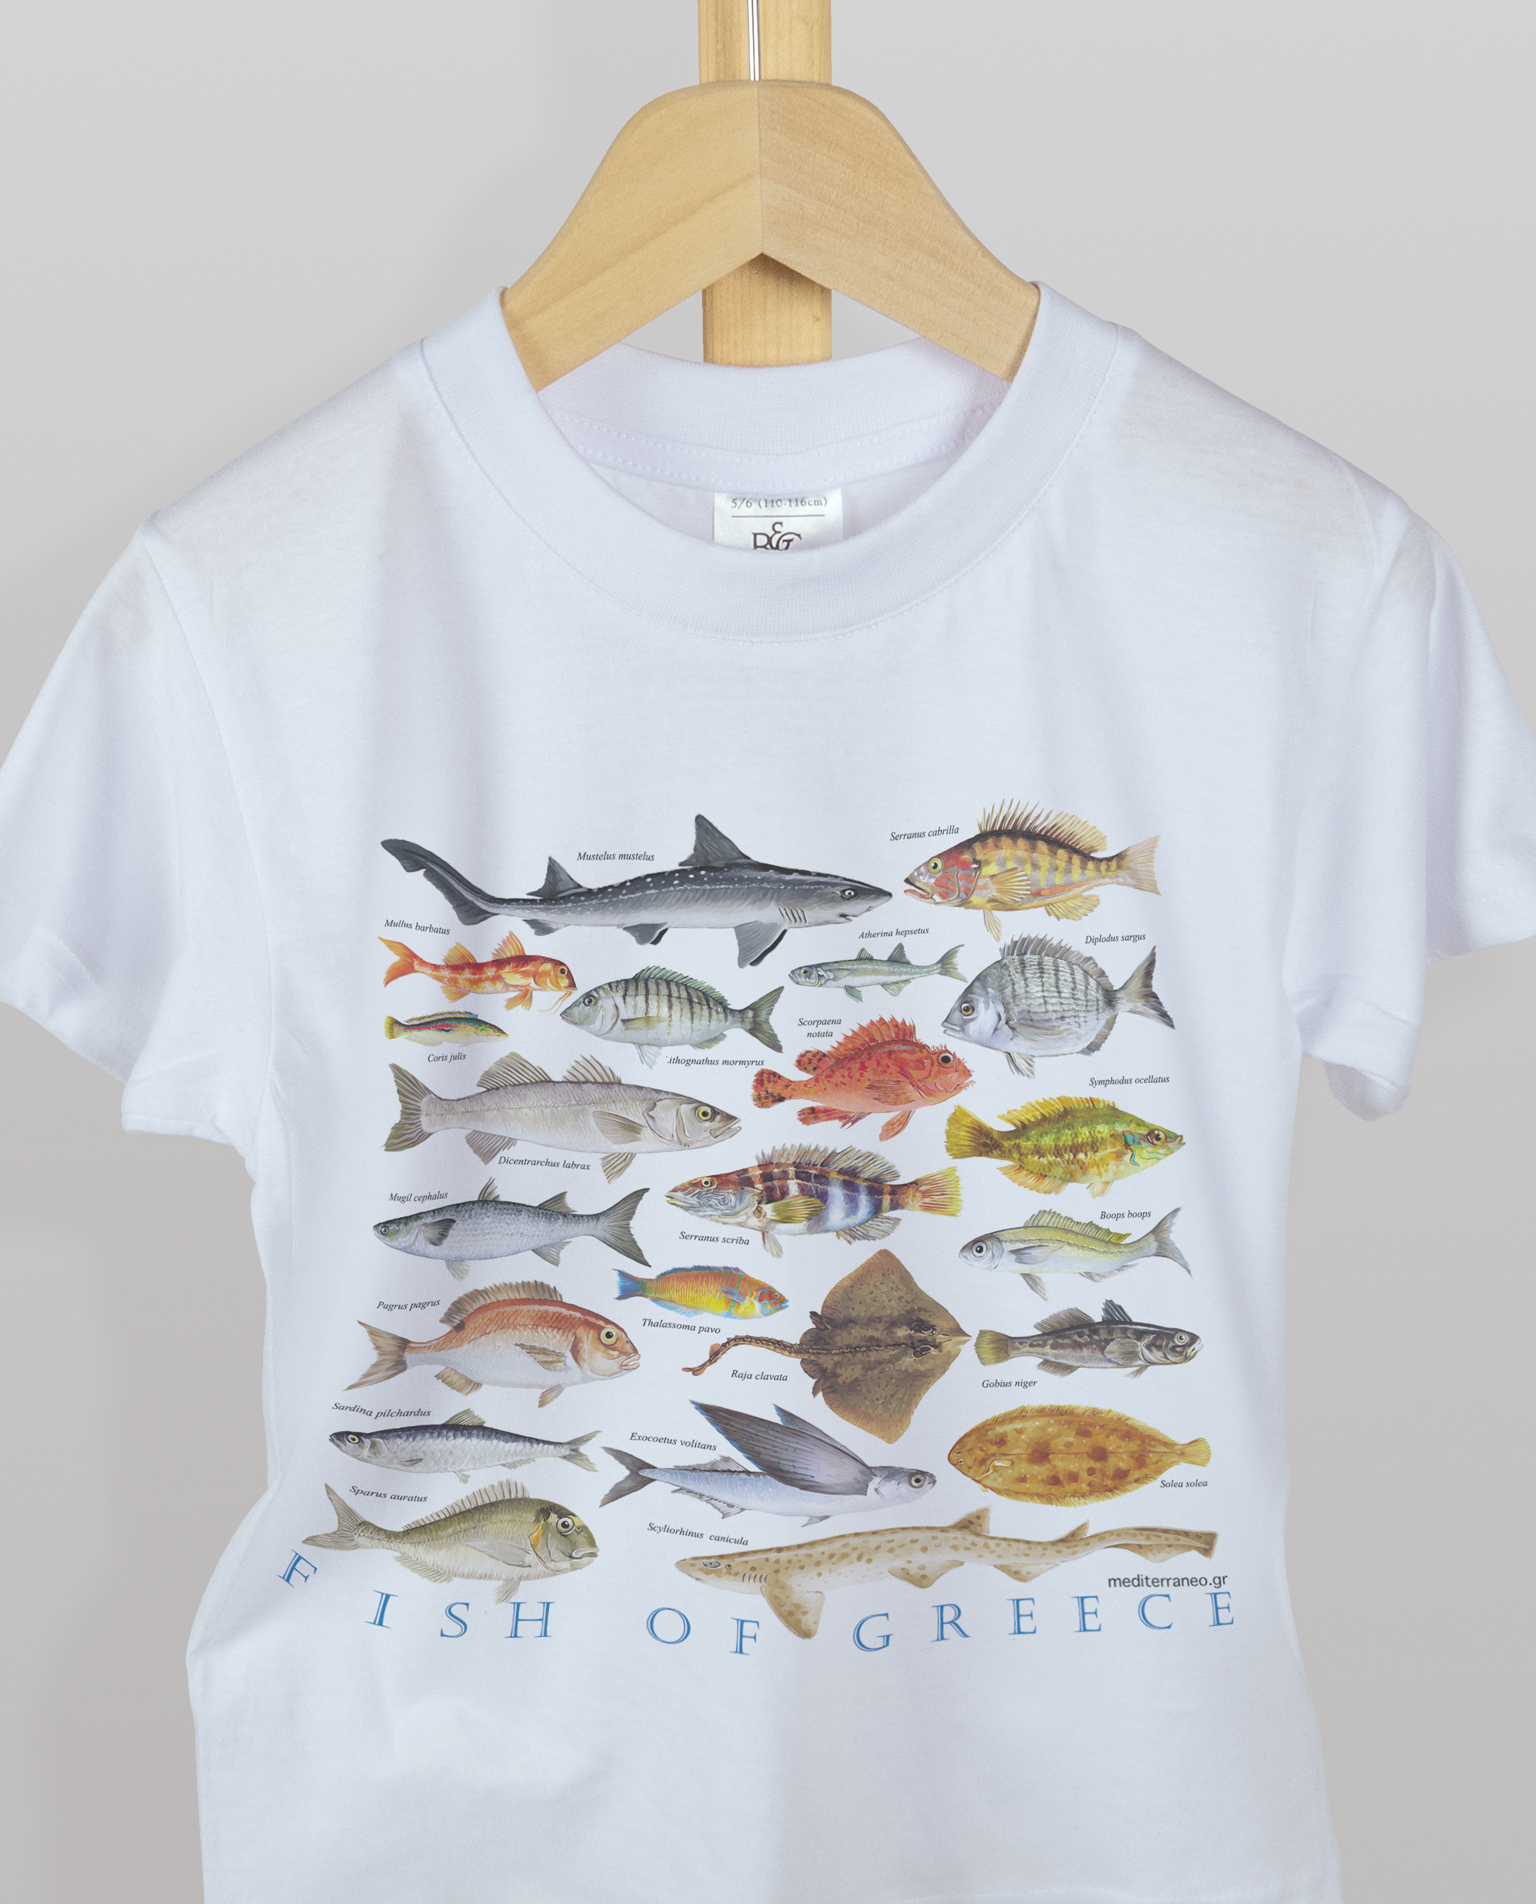 Kids T-shirt with fish of Greece print by Mediterraneo